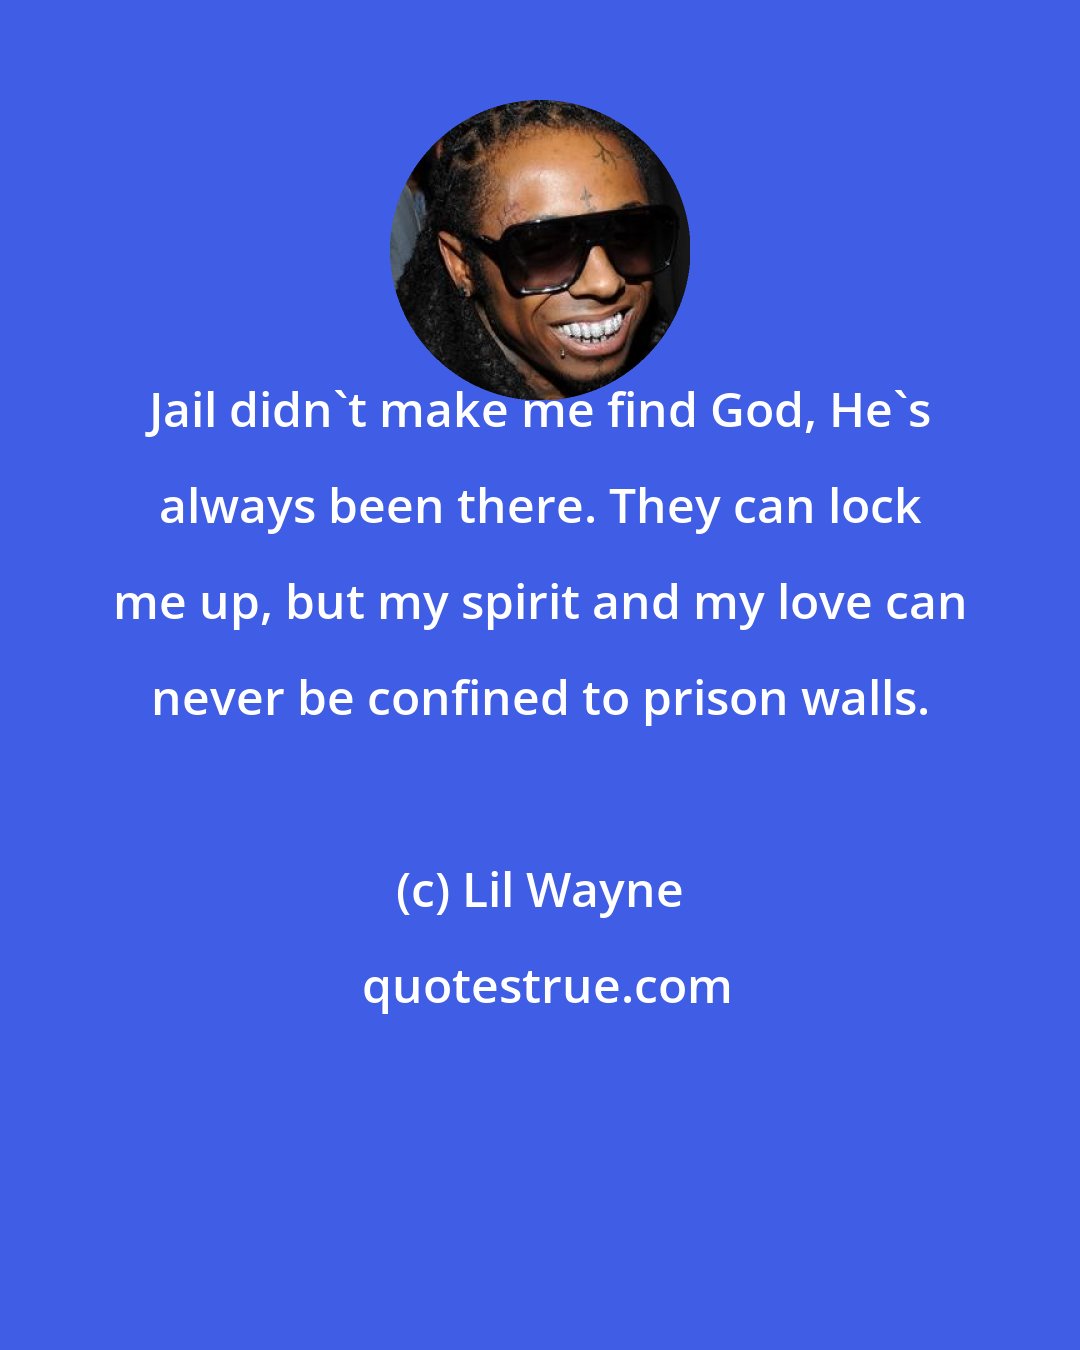 Lil Wayne: Jail didn't make me find God, He's always been there. They can lock me up, but my spirit and my love can never be confined to prison walls.